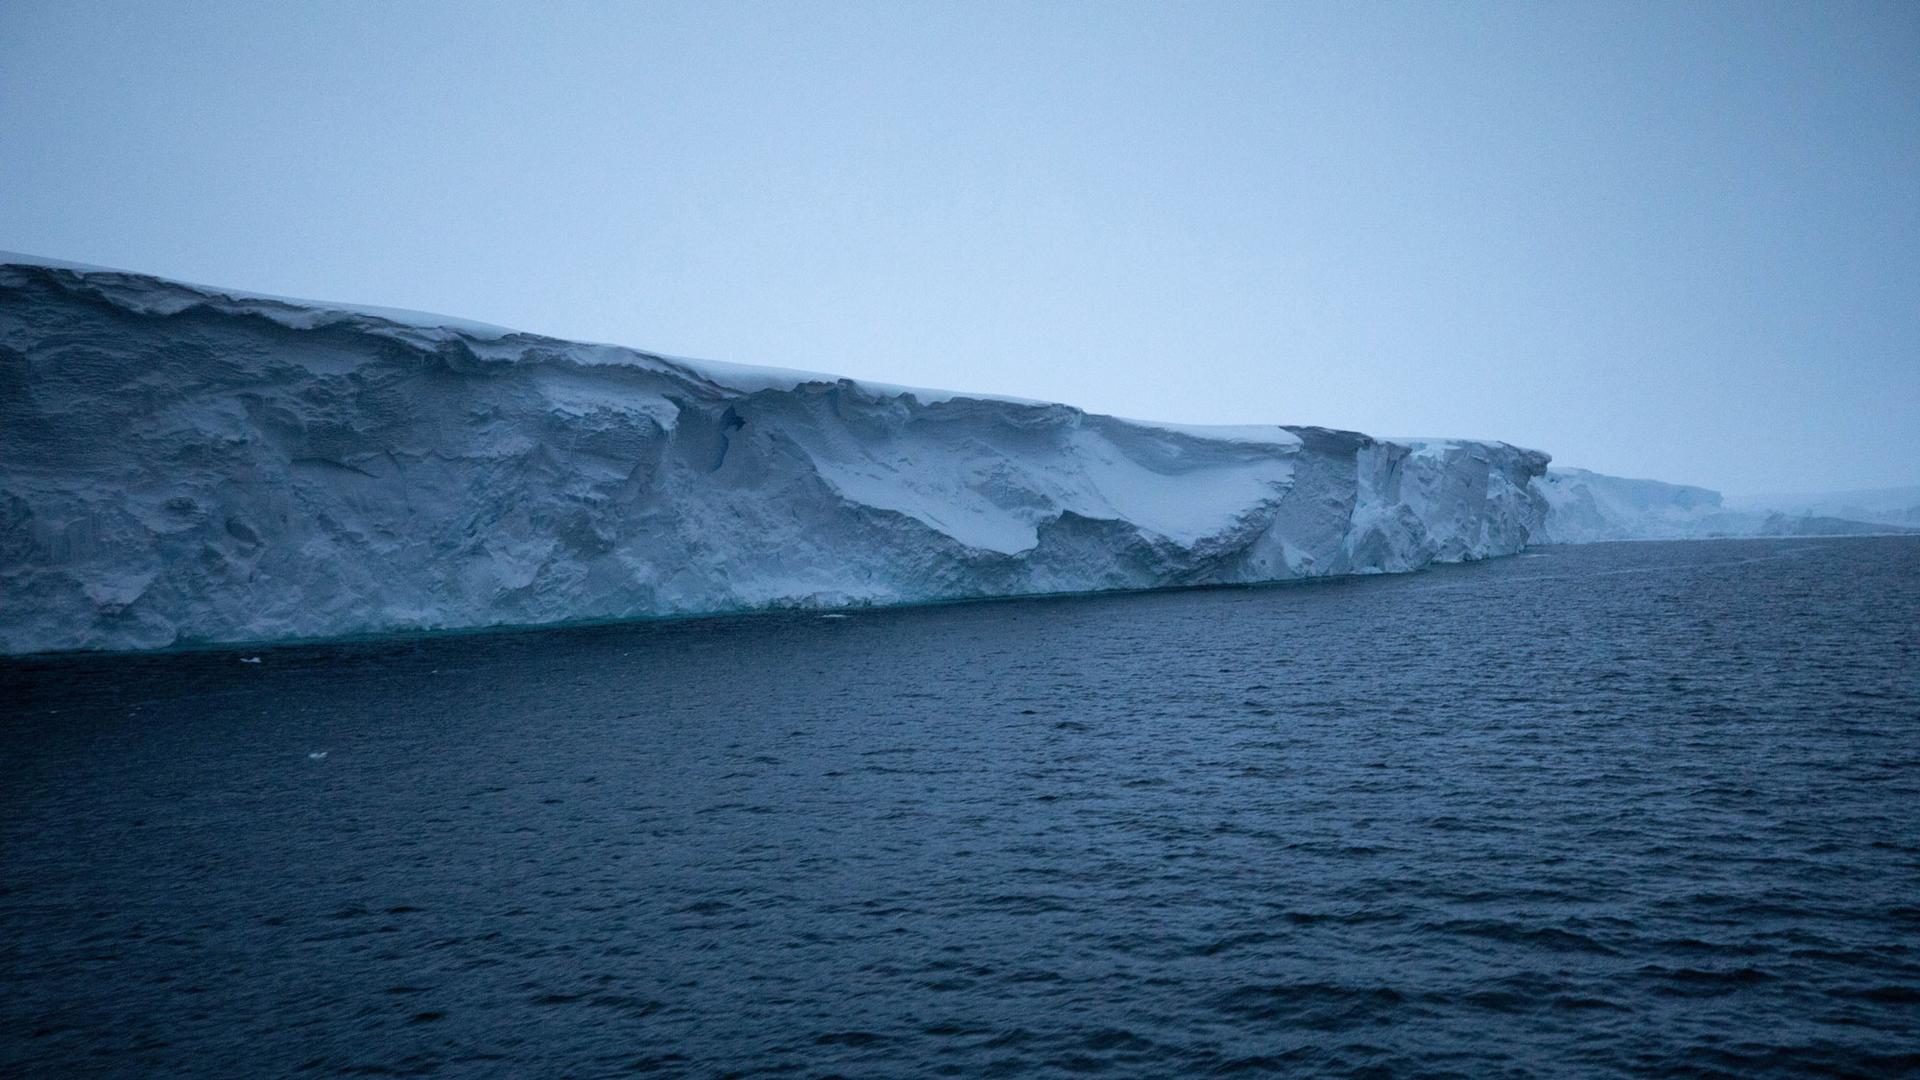 The eastern ice tongue of Thwaites Glacier is shown rising out of deep blue ocean waters.